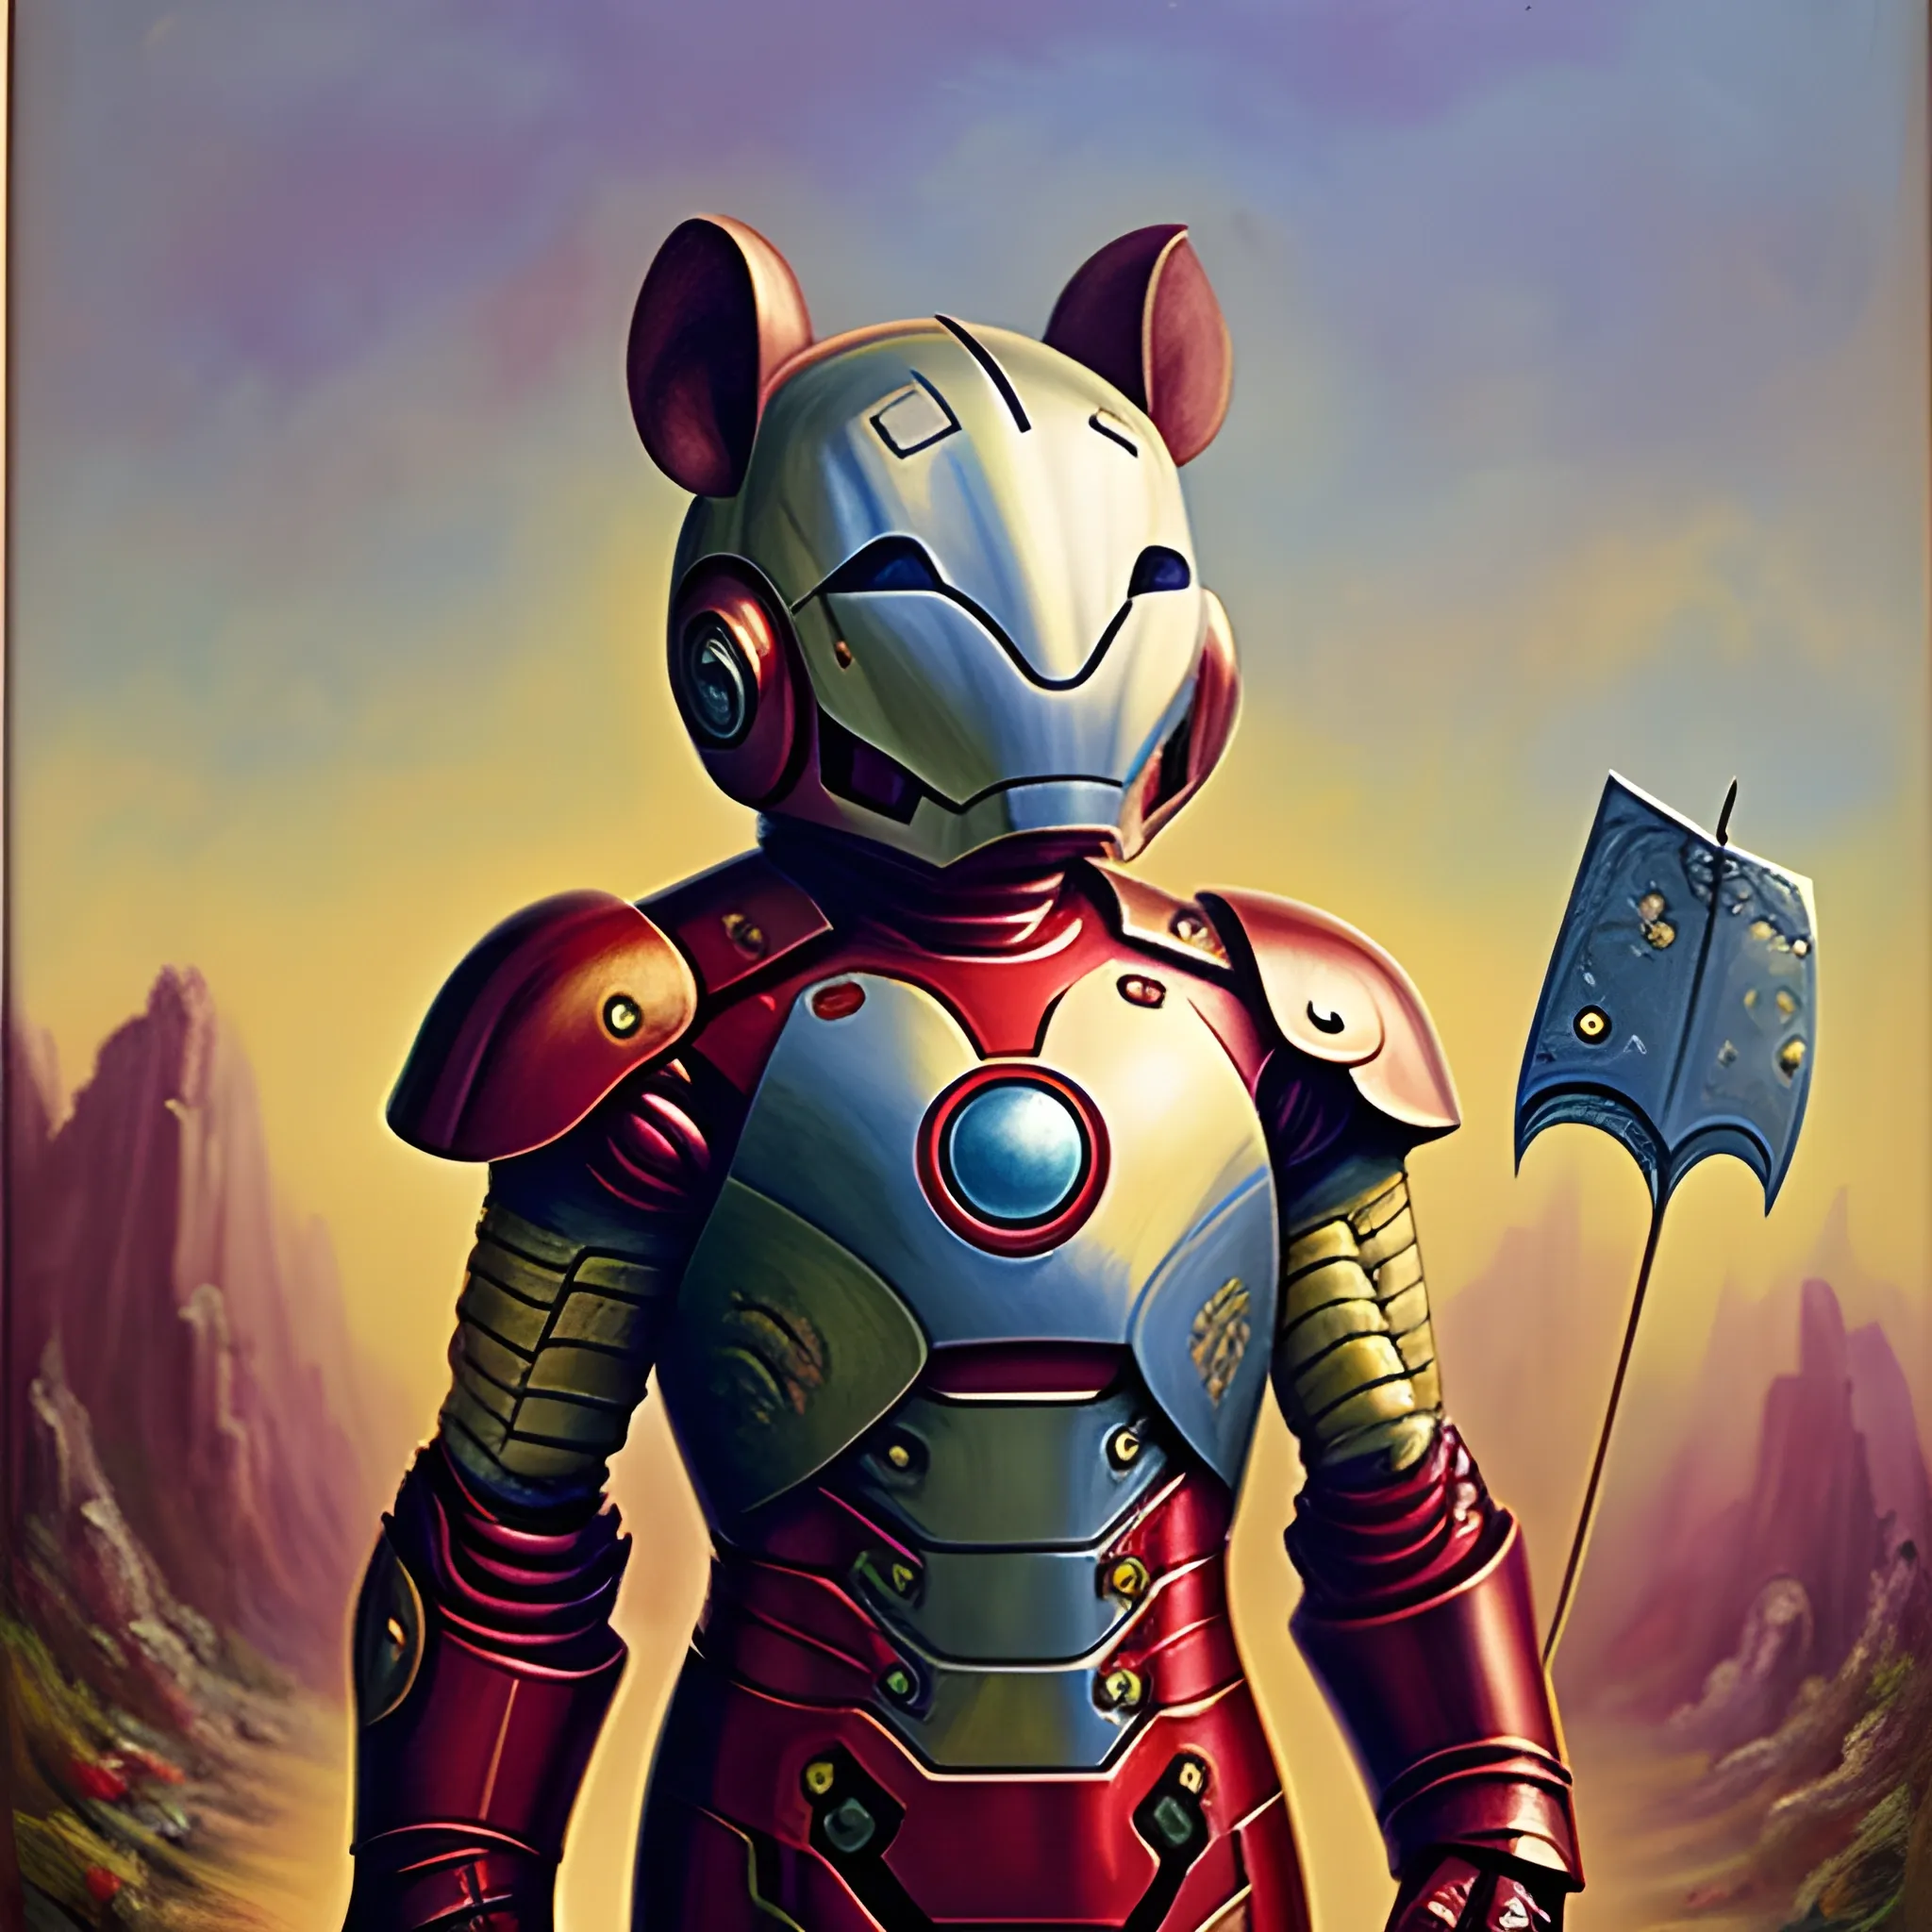 General Mouse is wearing armor. Holding a sword in hand, Oil Painting, Trippy，Just like Iron Man